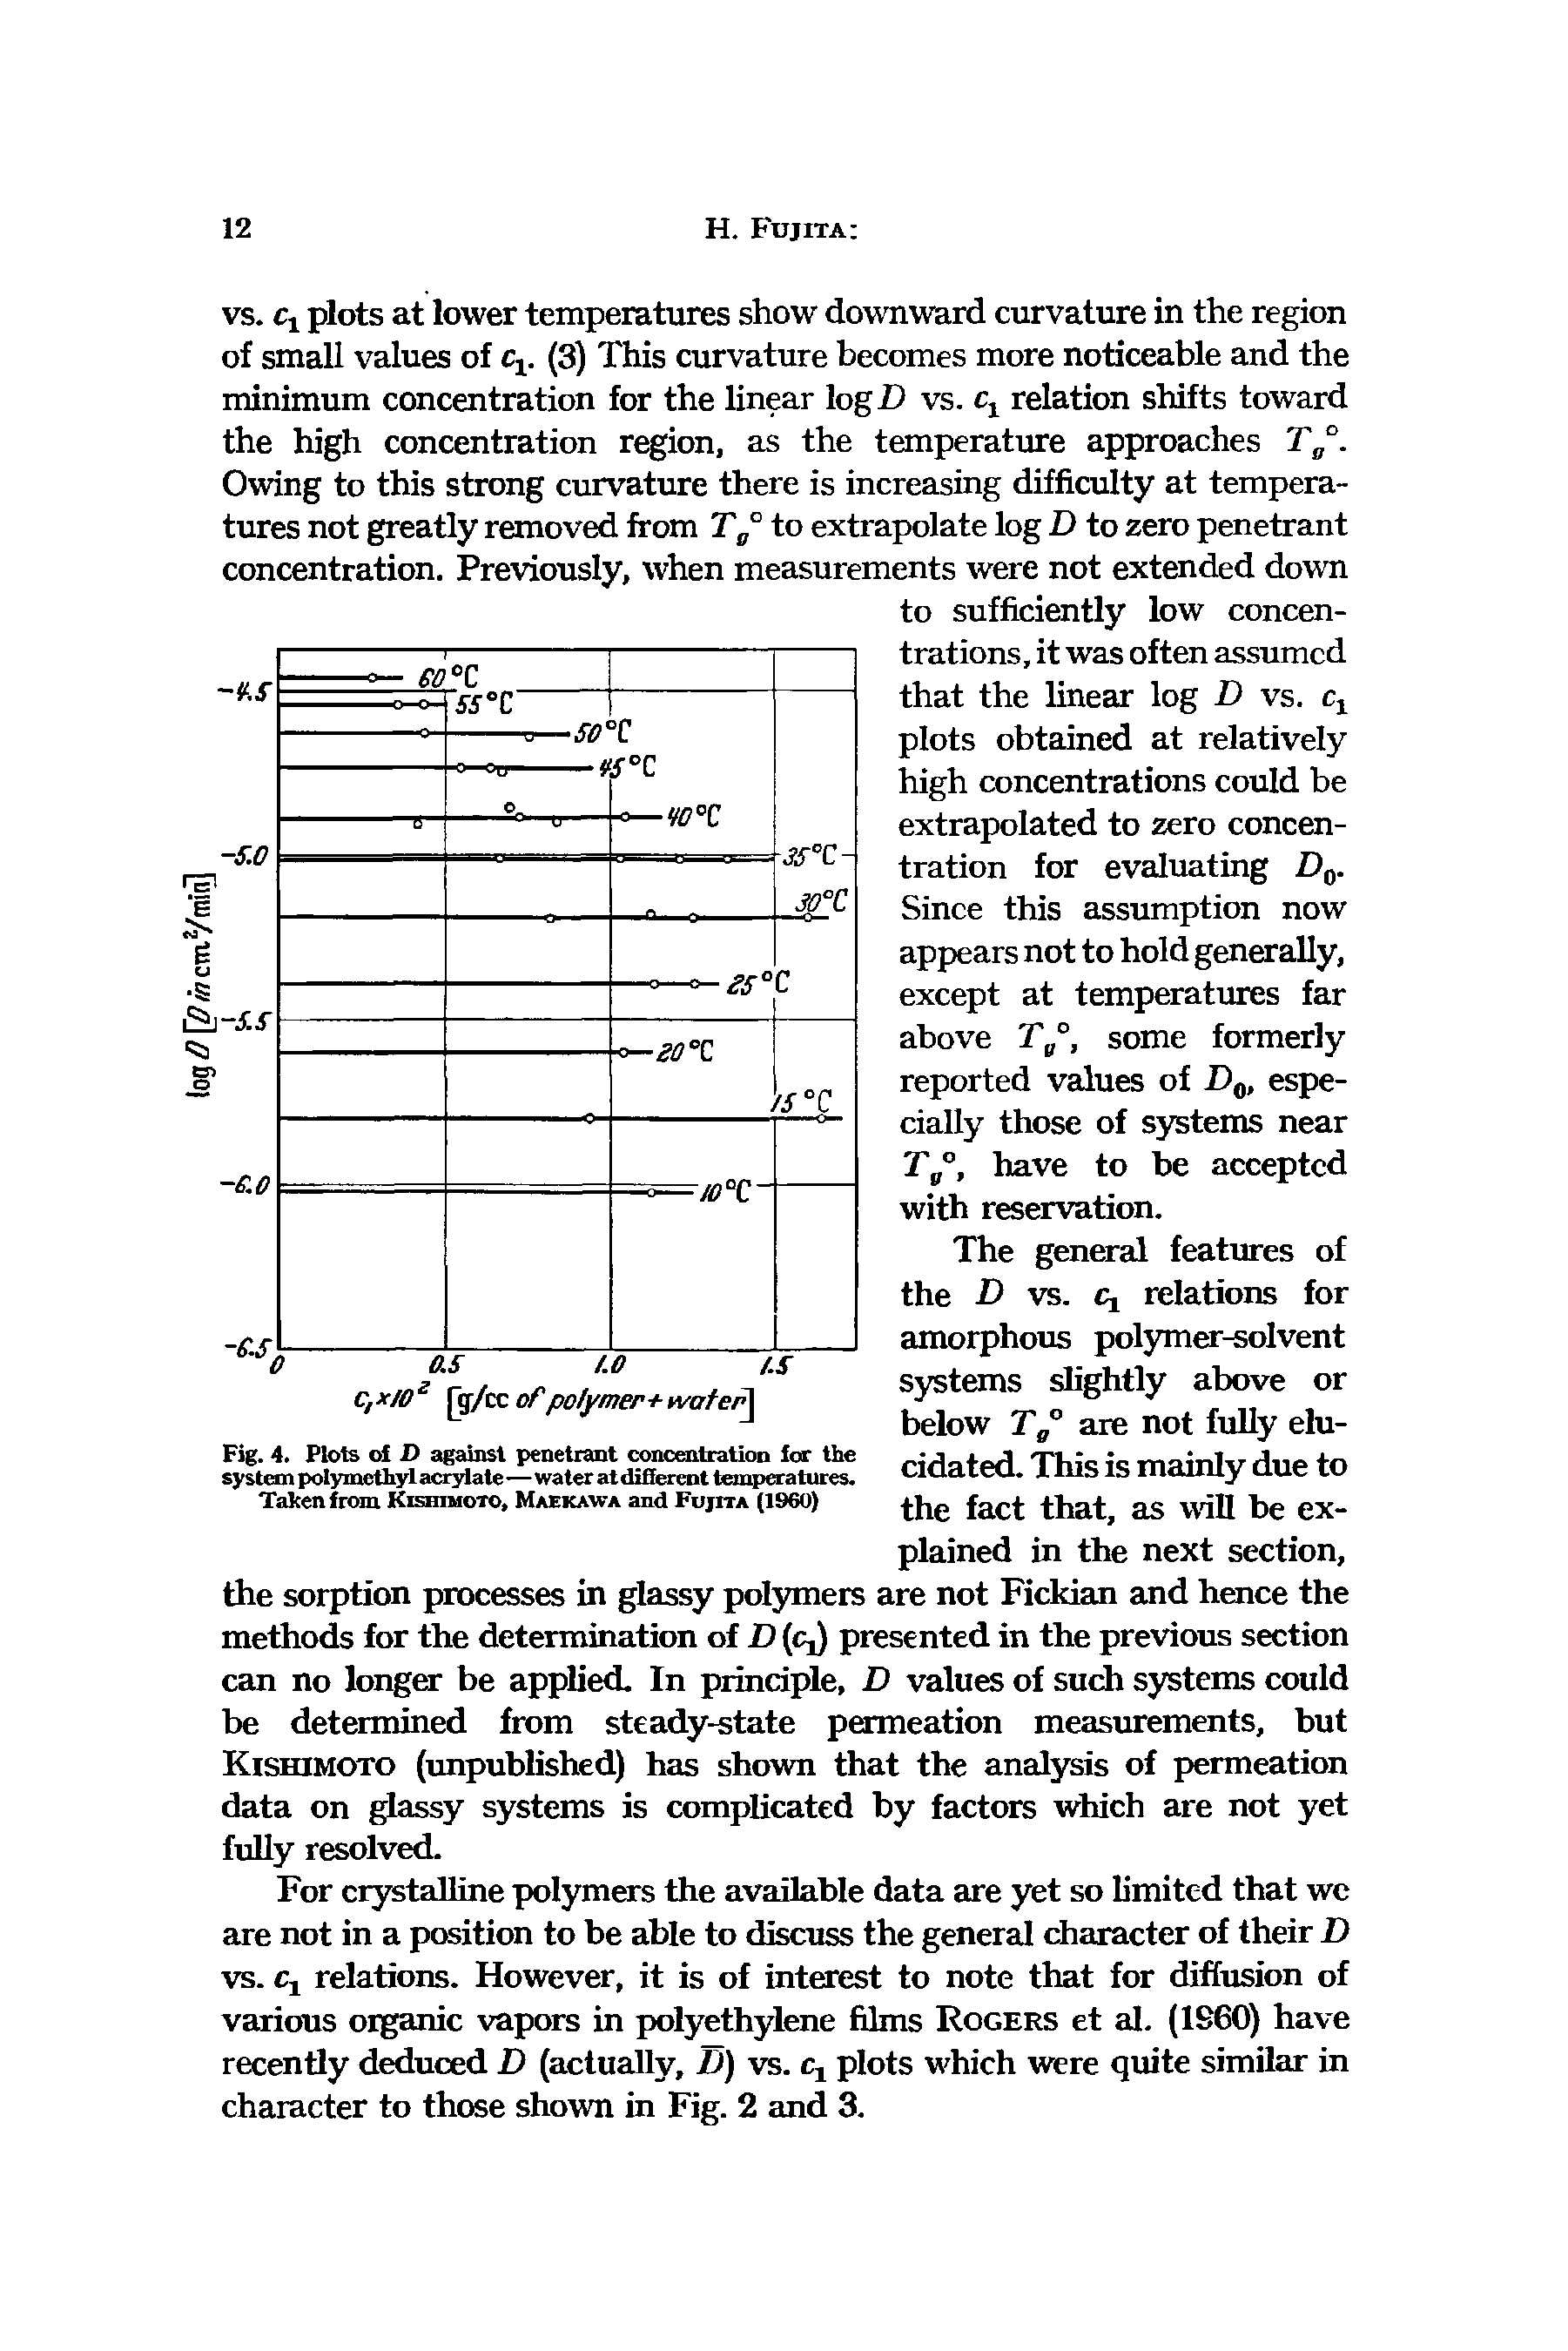 Fig. 4. Plots oi D against penetrant concentration for the system polymethyl acrylate—water at different temperatures. Taken from Kishimoto, Maekawa and Fujita (1960)...